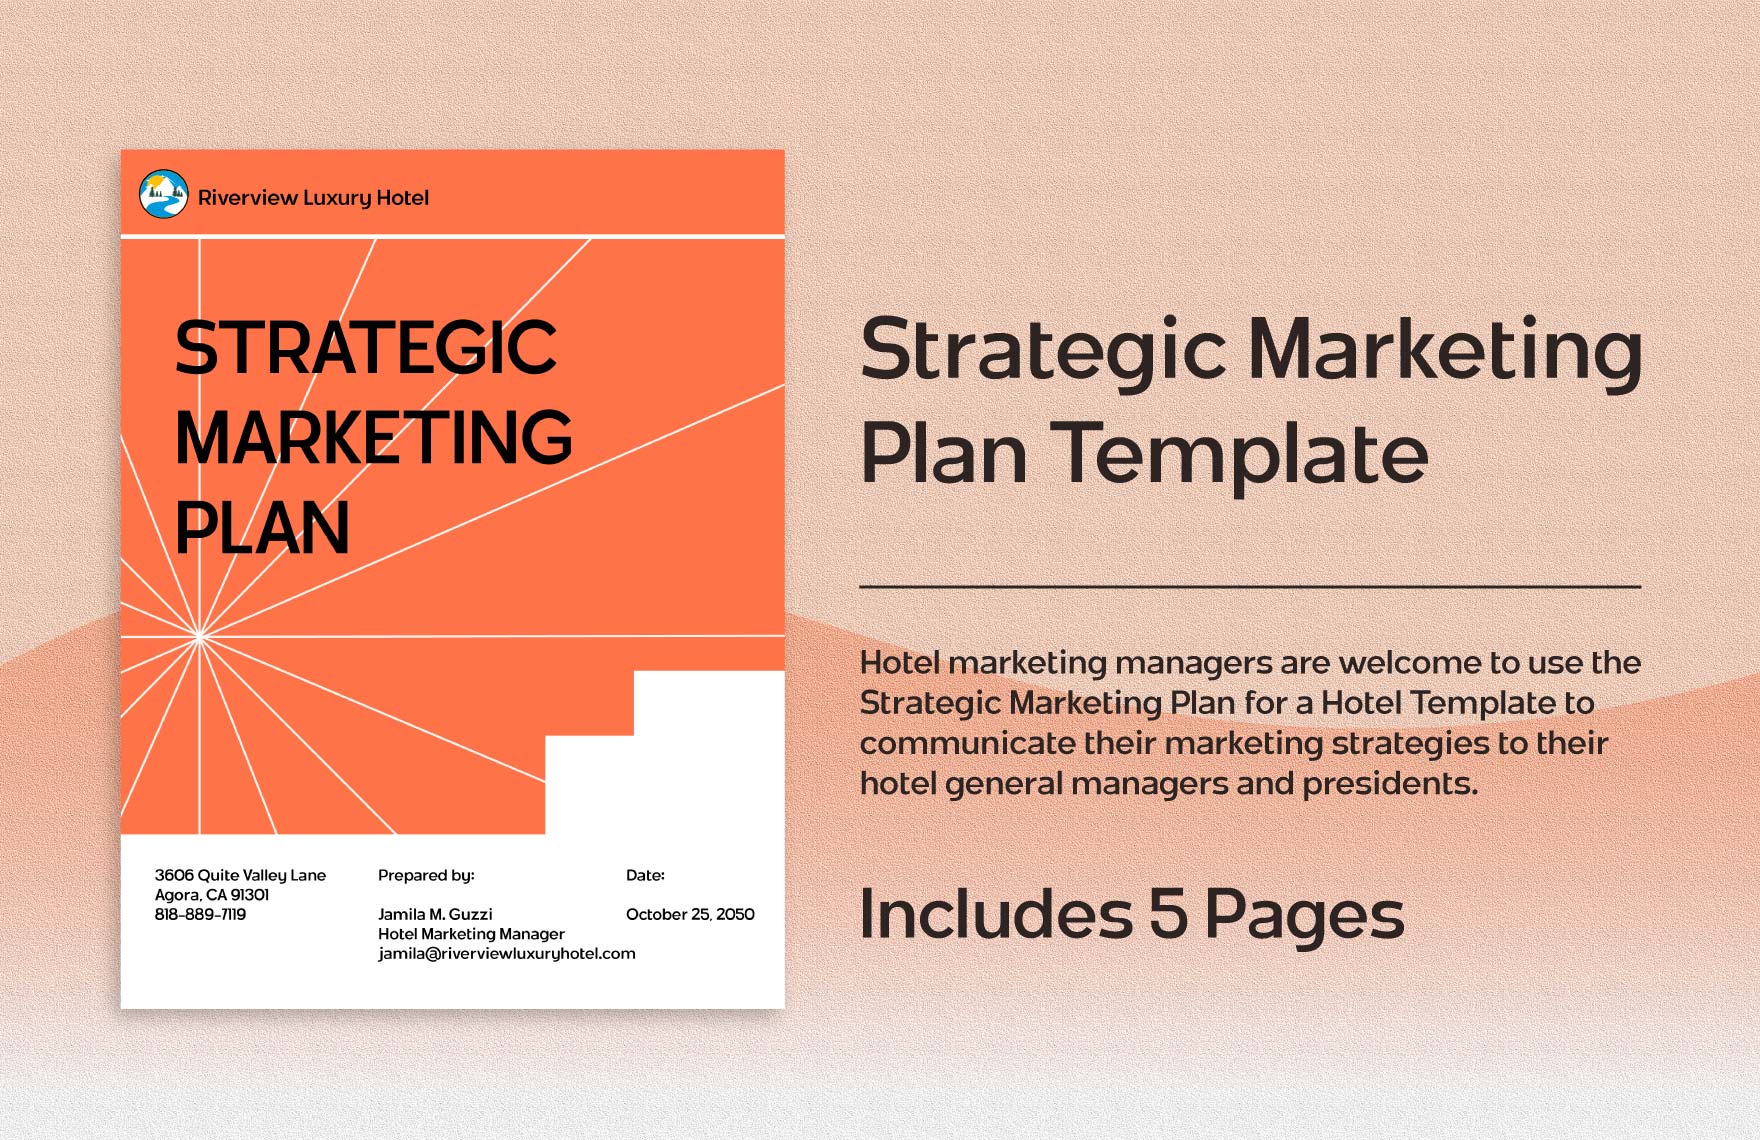  Strategic Marketing Plan for a Hotel Template